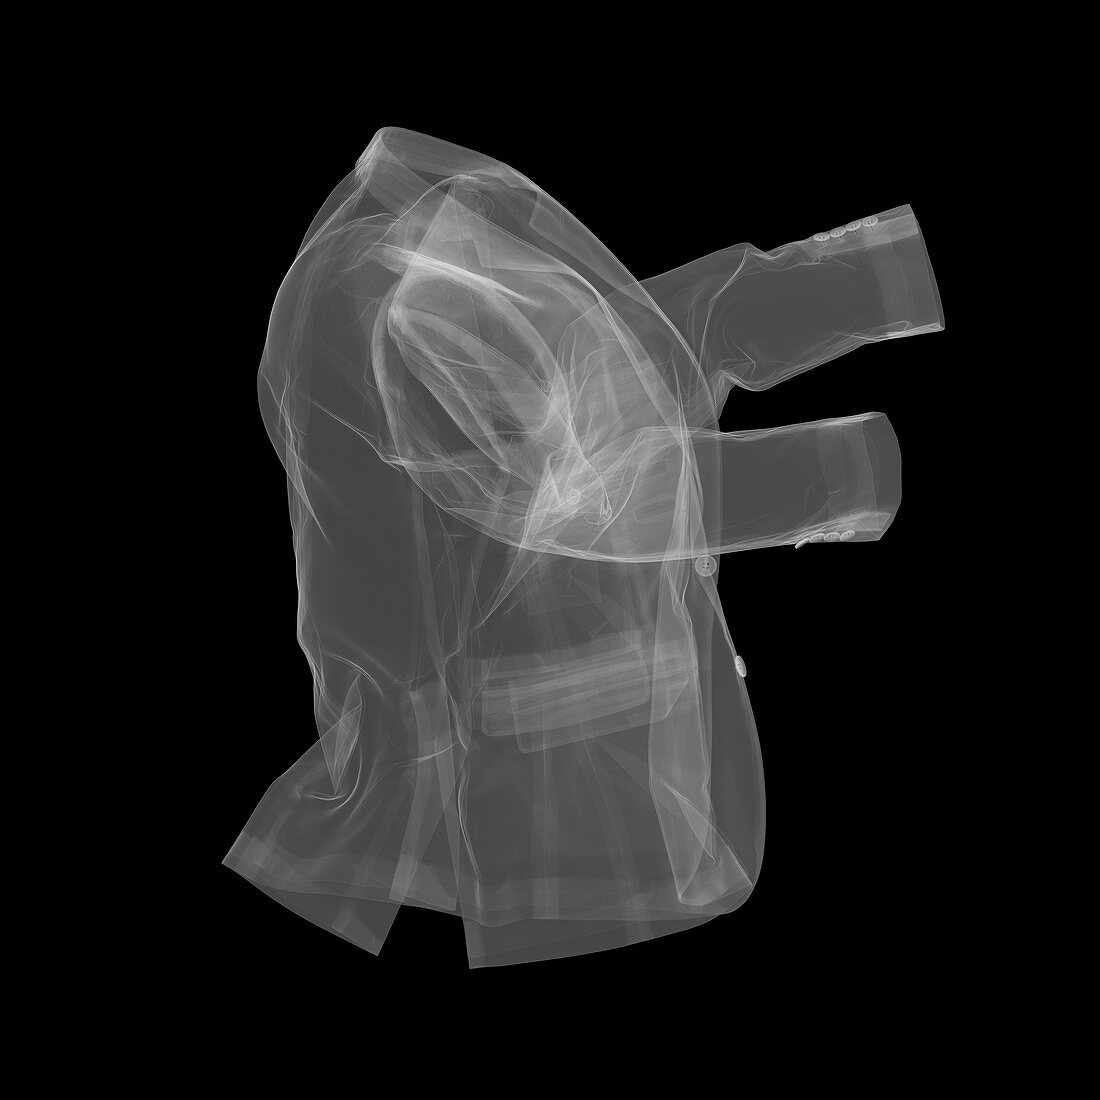 Suit jacket, X-ray